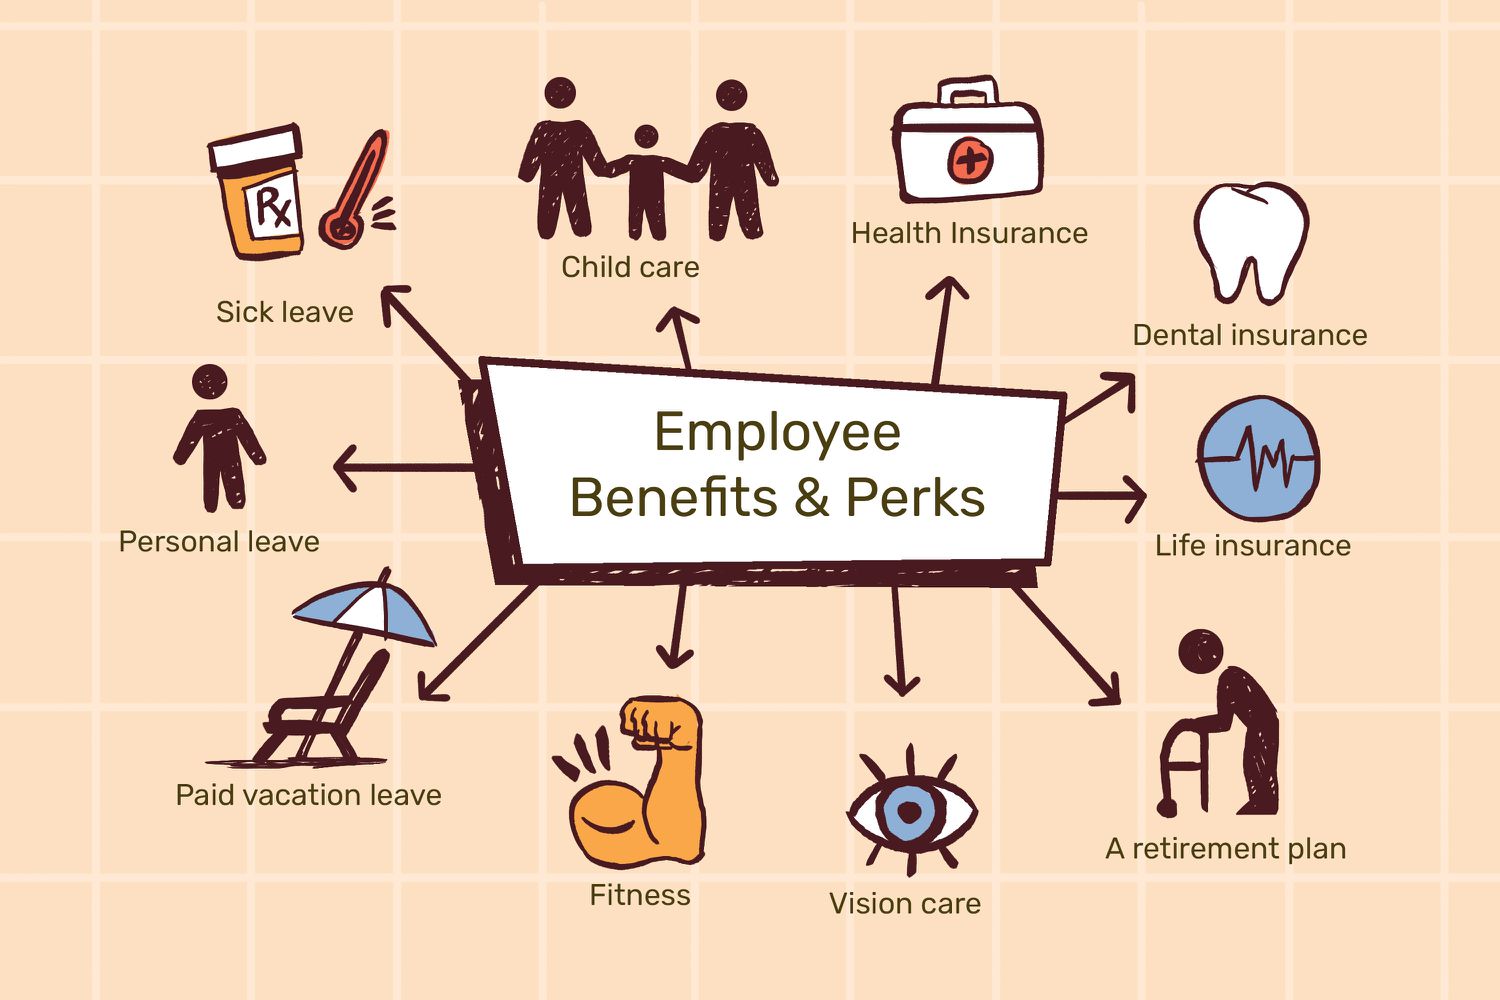 Compensation and Benefits